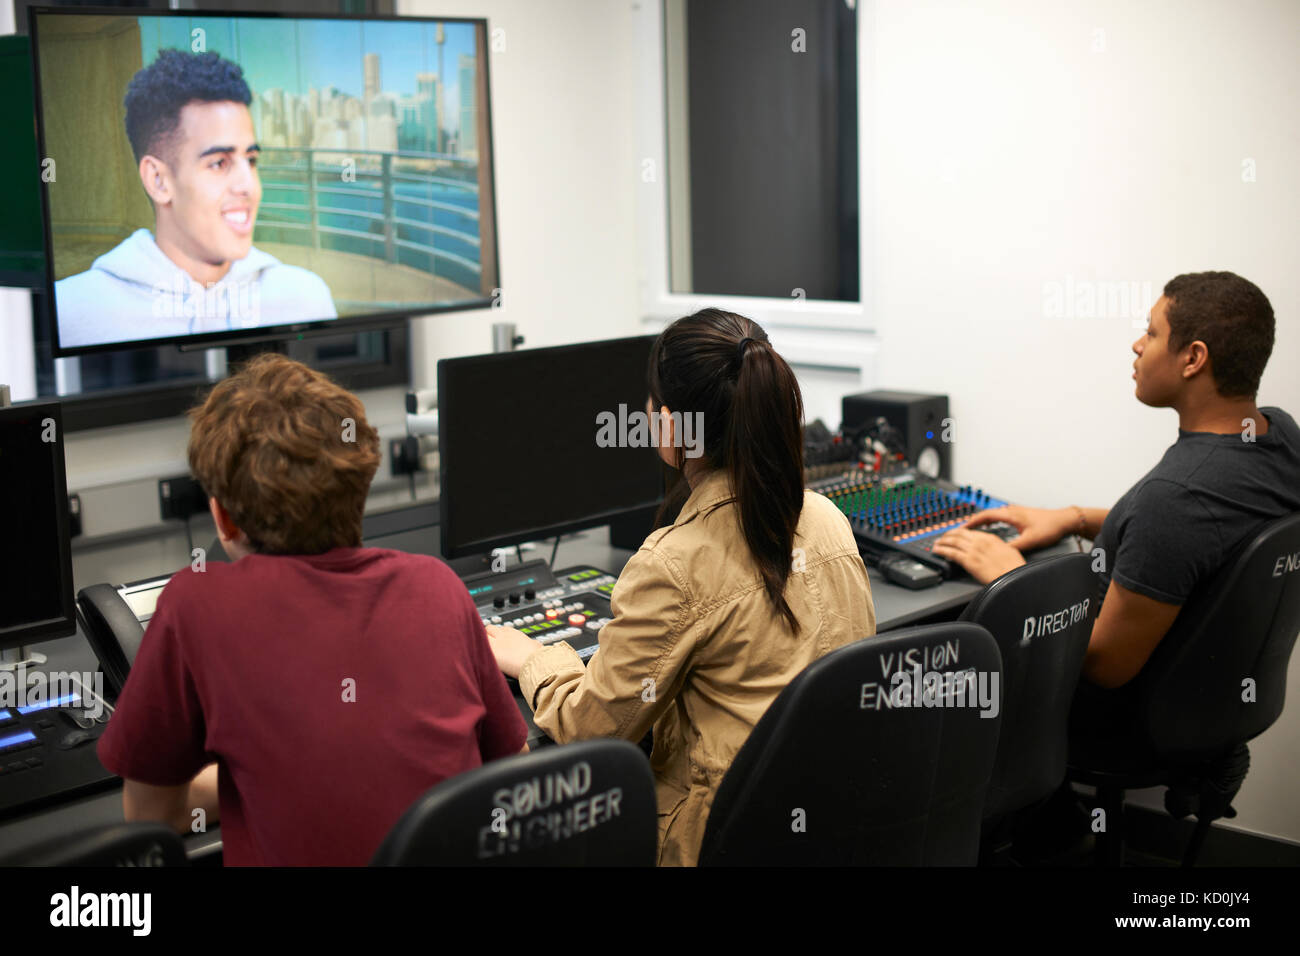 Young male and female college students at mixing desk watching TV screen Stock Photo